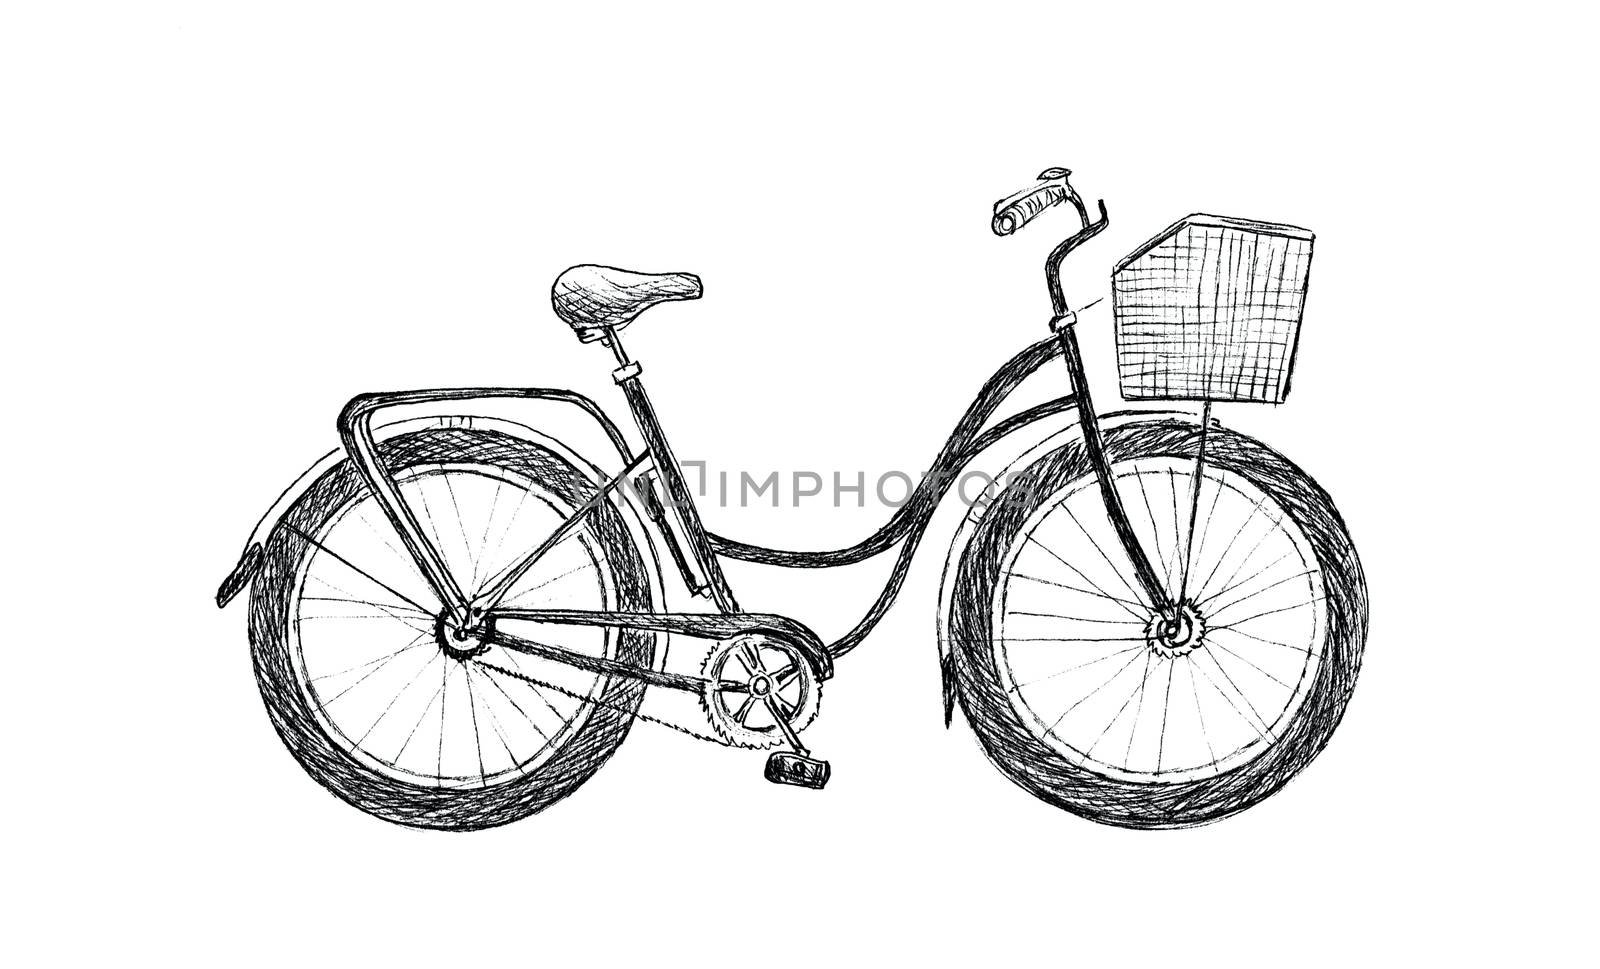 Vintage road bicycle hand drawn illustration. Eco transport sketch isolated on white background by sshisshka